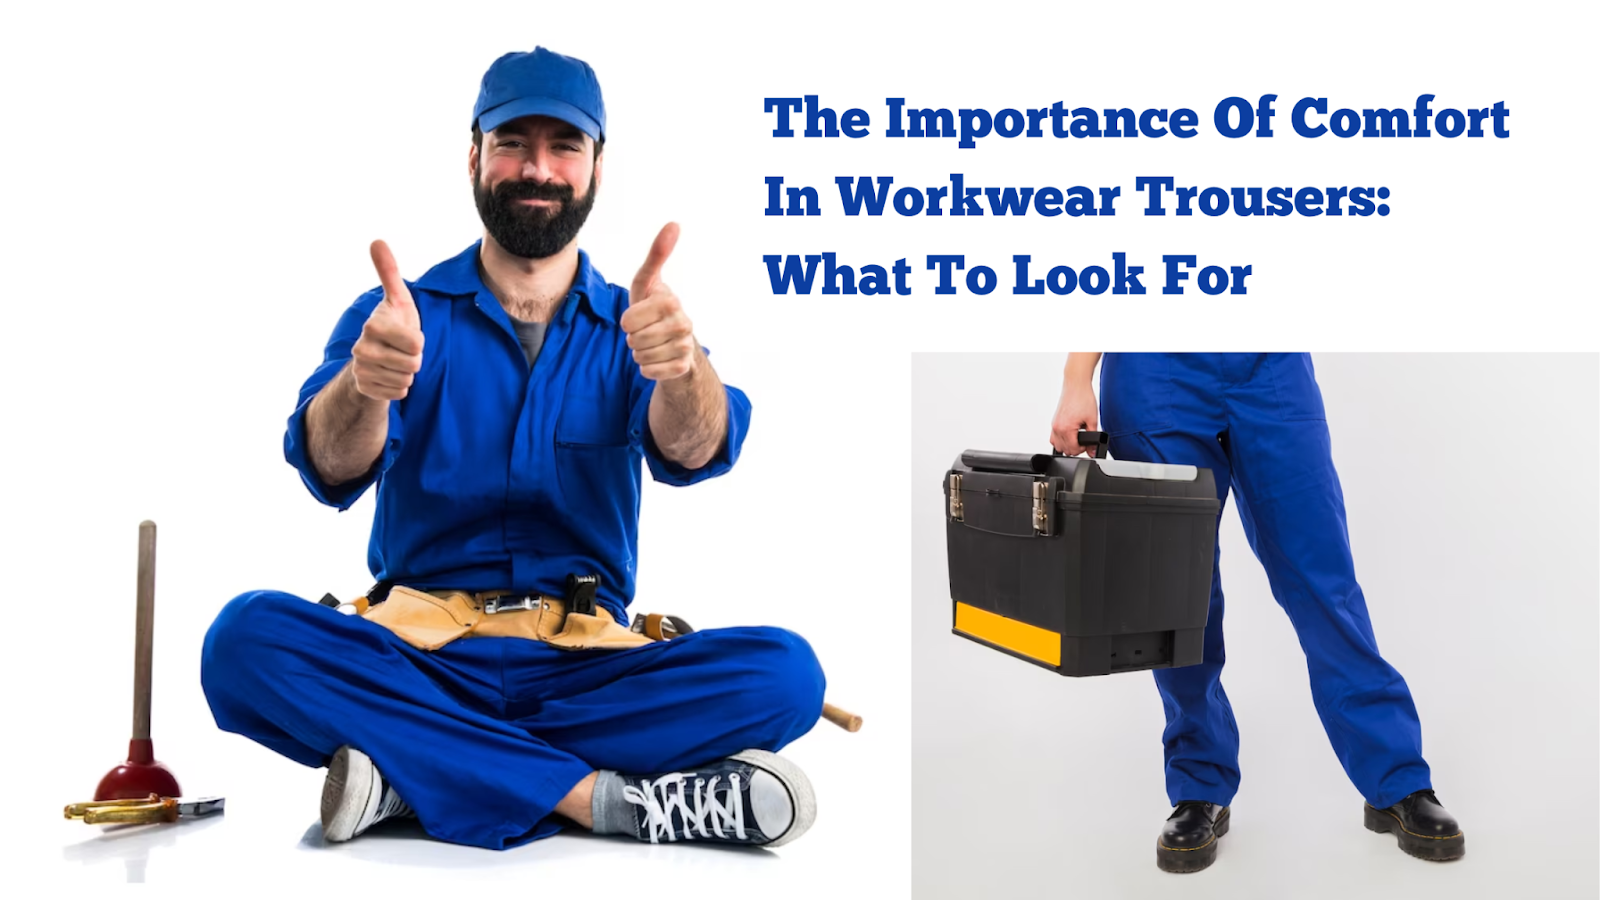 The Importance Of Comfort In Workwear Trousers: What To Look For